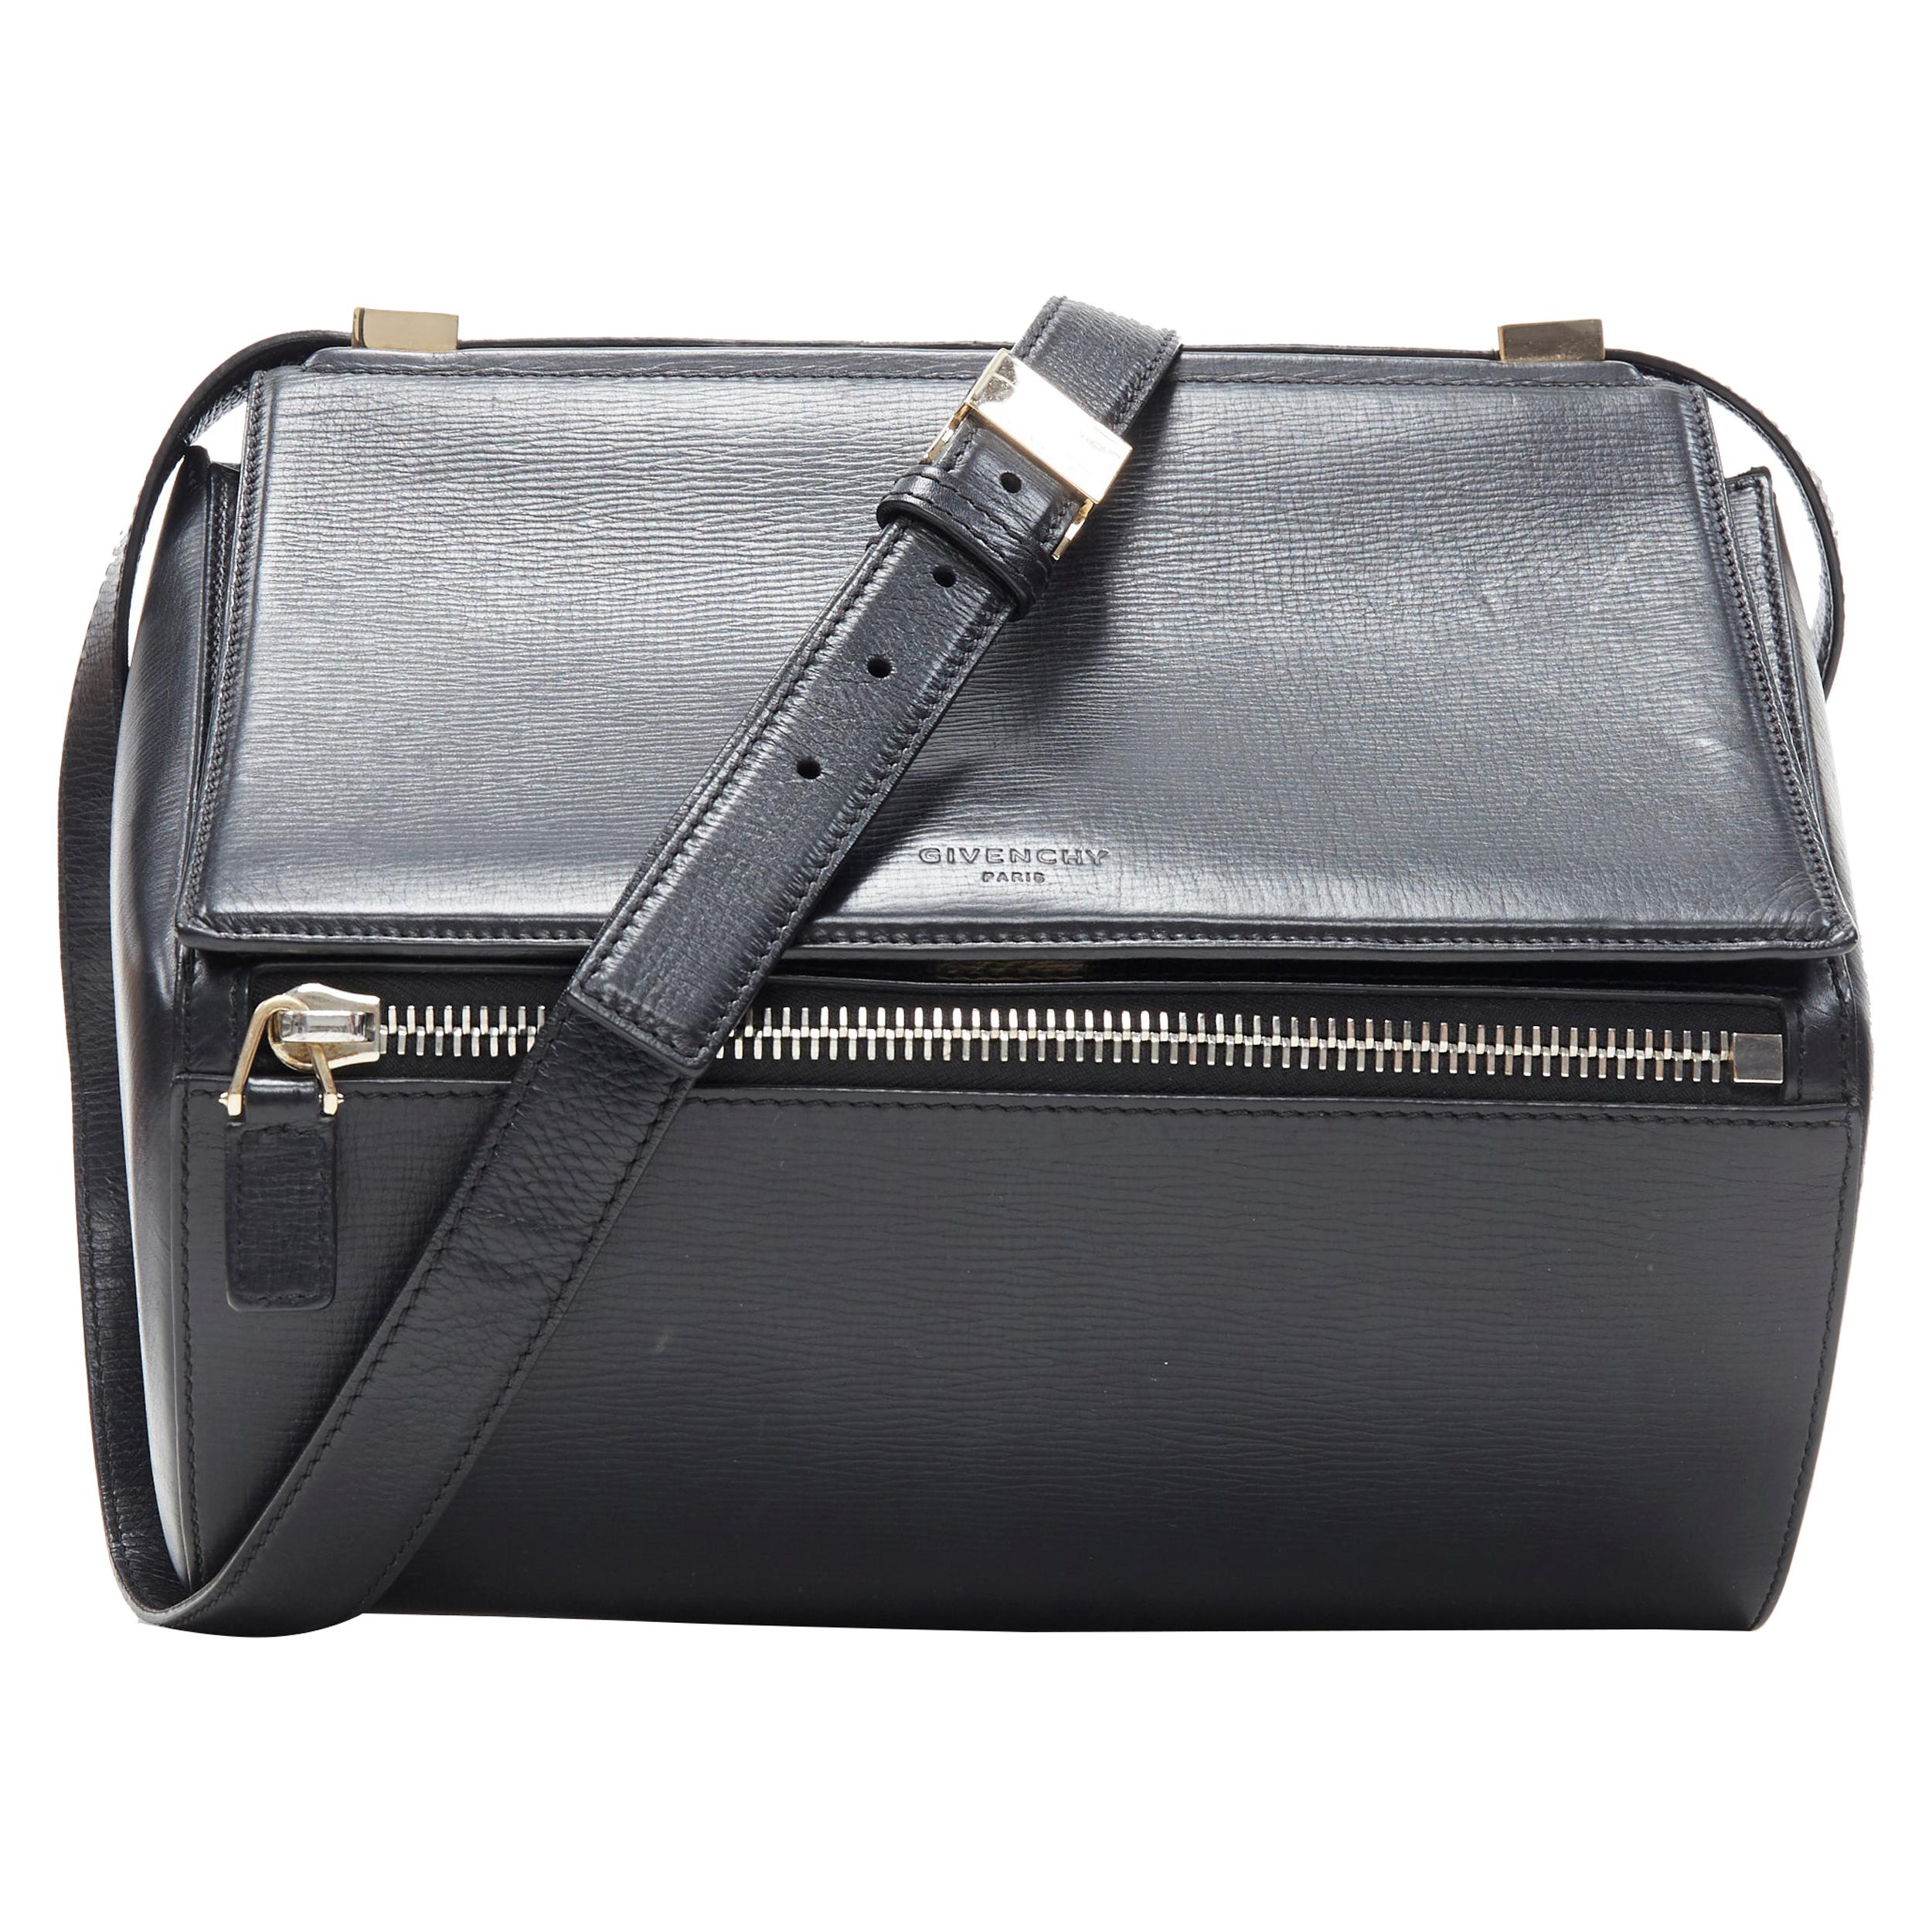 GIVENCHY Pandora Box black leather flap front zip structured crossbody bag